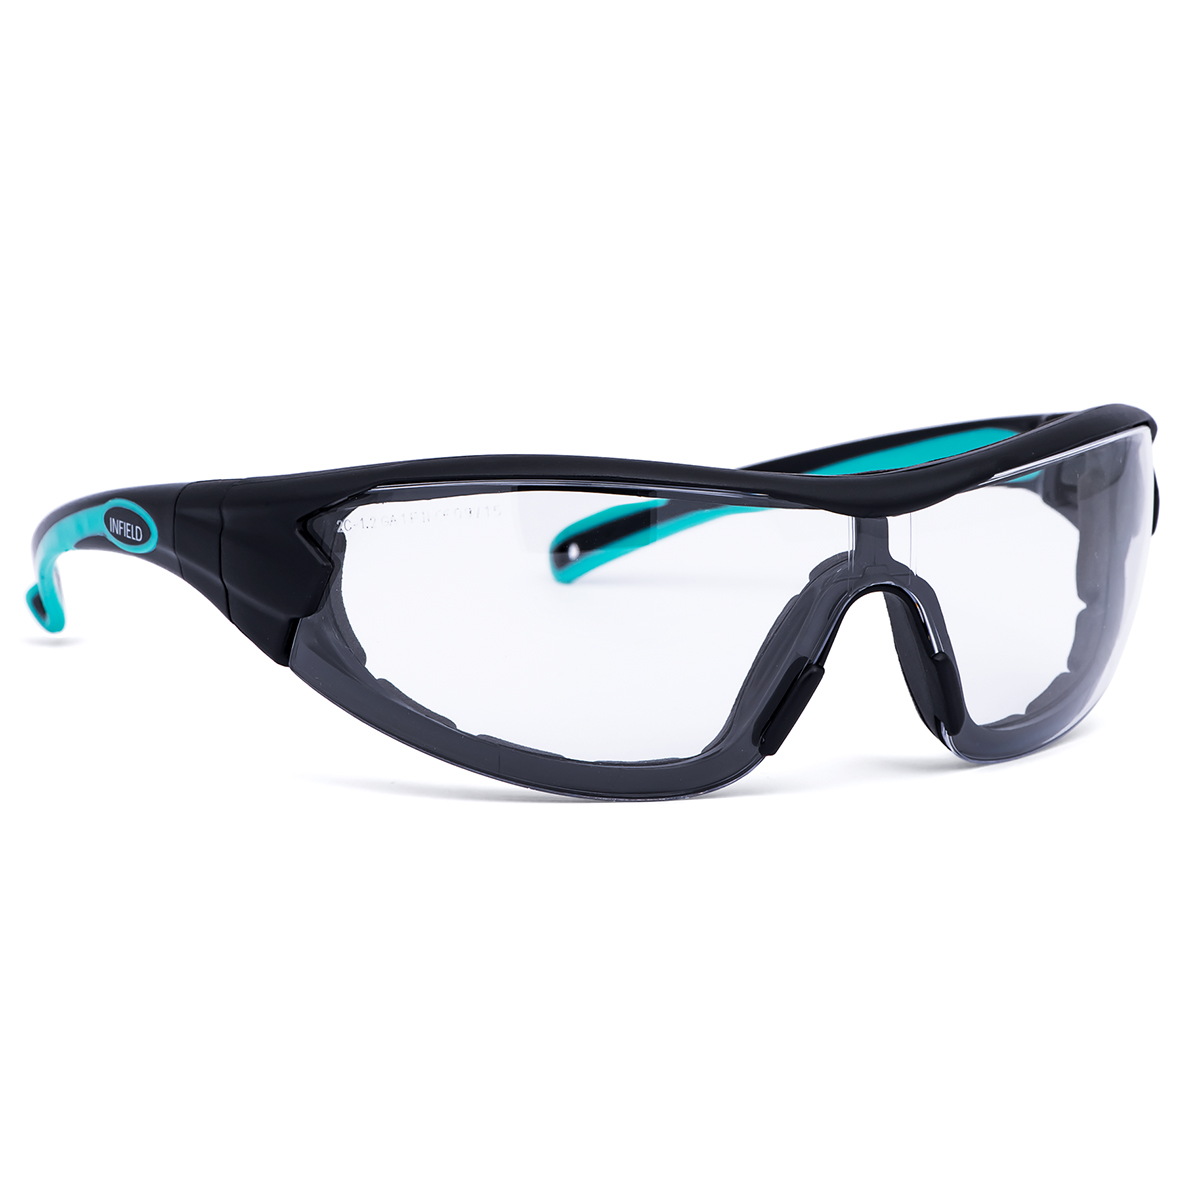 VELOR BLACK-TURQUOISE PC AF AS UV DIOPTRIE ADD 1.5